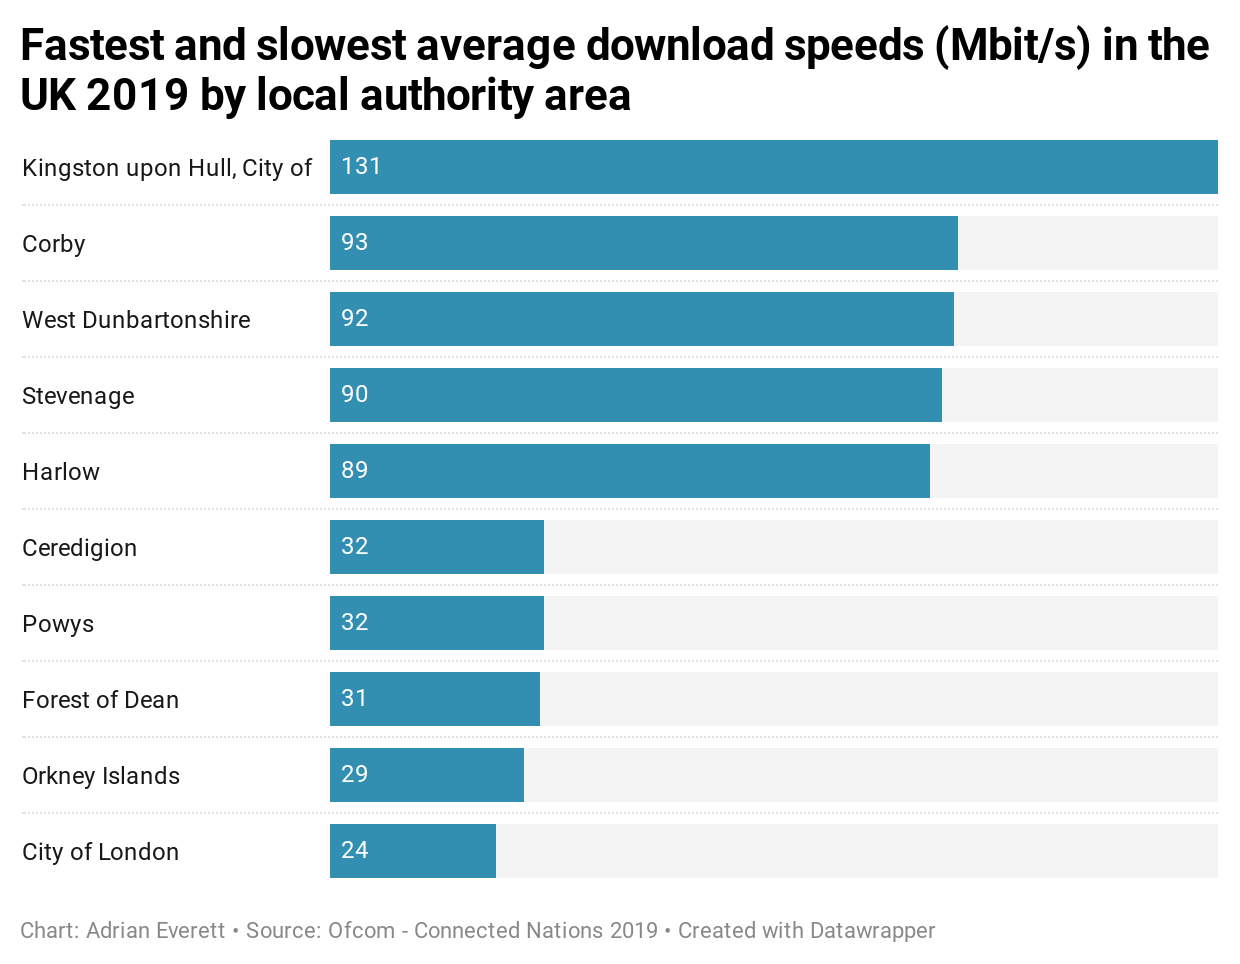 Fastest and slowest average download speeds (Mbps) in the UK 2019 by local authority area